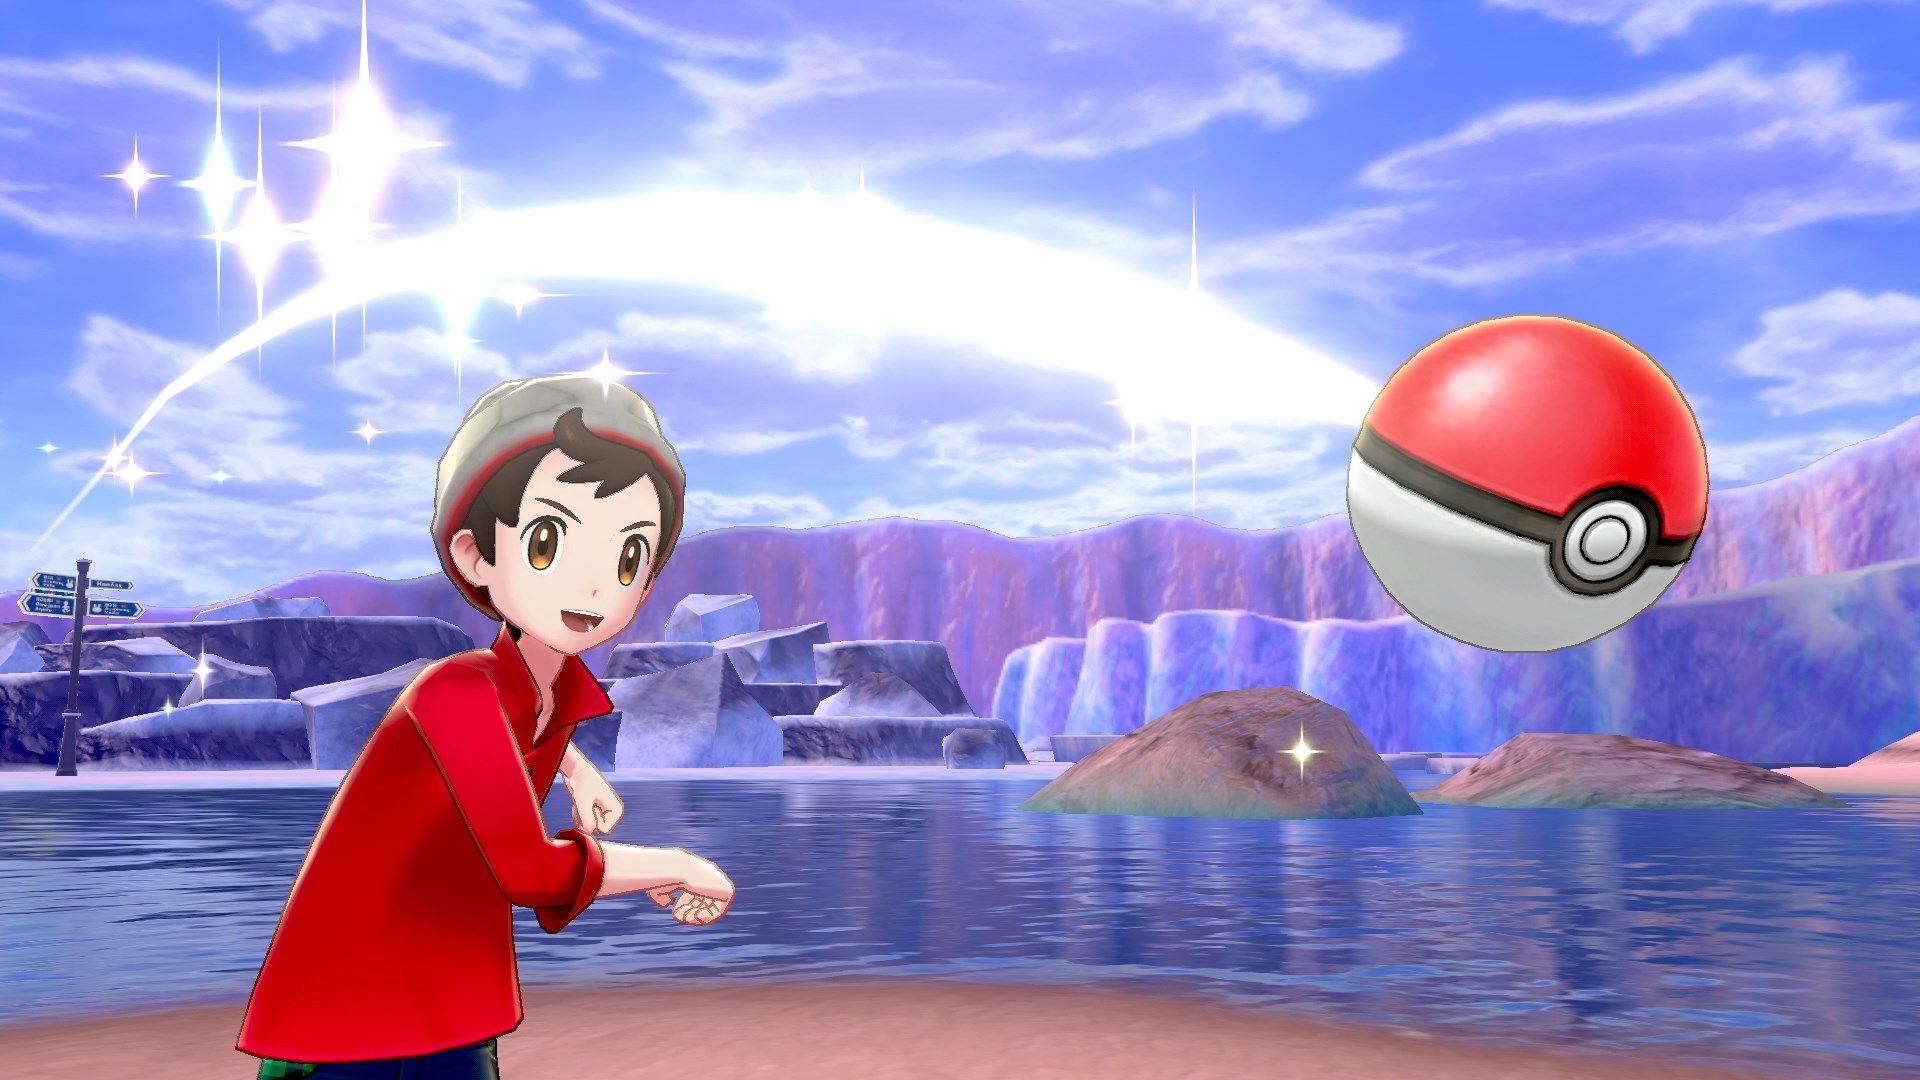 Pokémon Sword and Shield 10 Things We Already Know About The Game